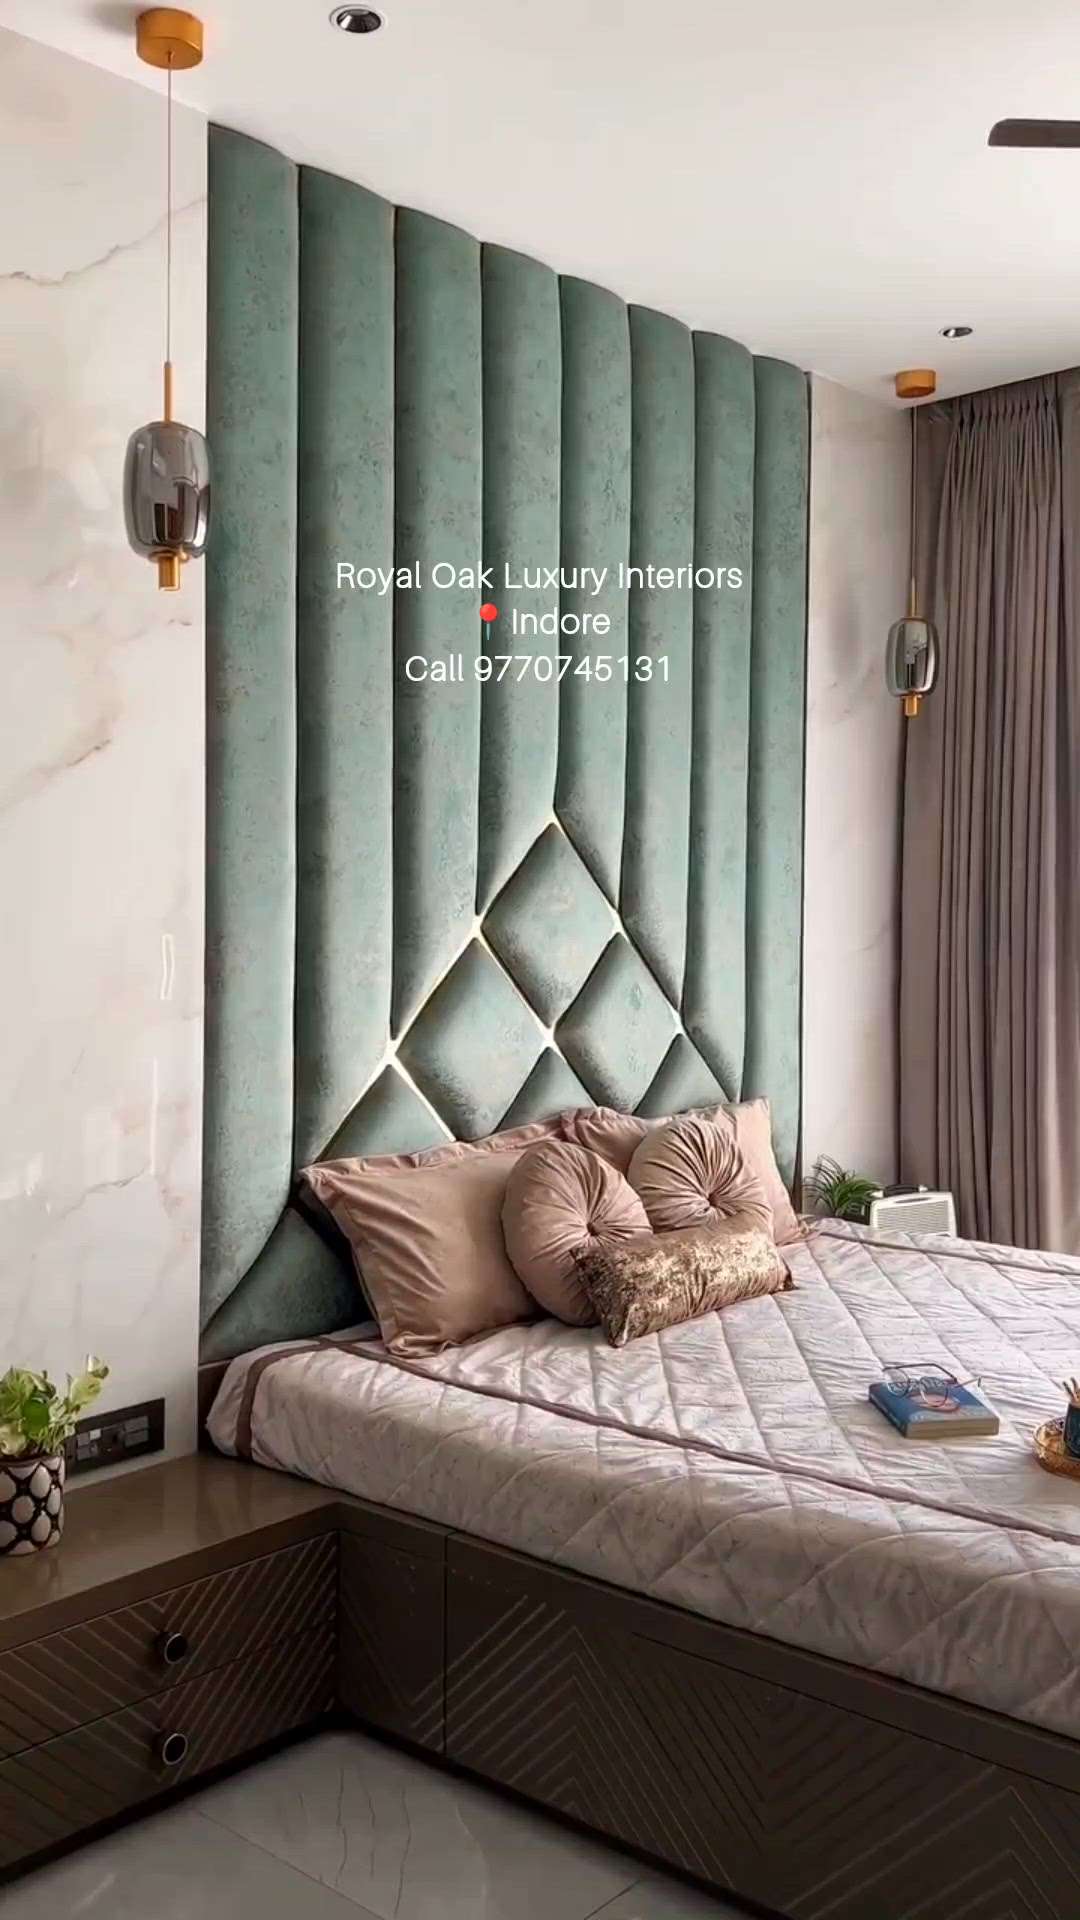 Call 9770745131. Royal Oak Projects specialize in luxury interior design projects in Indore and surrounding cities. Message us for free consultation and designing custom interiors for your home or office. 

___________
#home #homesweethome #homedecor #homedesign #homeinterior #architecture #builder #interiordesign #design #luxury #luxuryhomes #housedesign #interior #construction  #homeinspiration #homestyle #homes #realestate #koloapp  #livingroom #livingroomdecor #bedroomdesign #bedroom #pool #indore #india #indorecity #madhyapradesh #mp #indori #indoregram